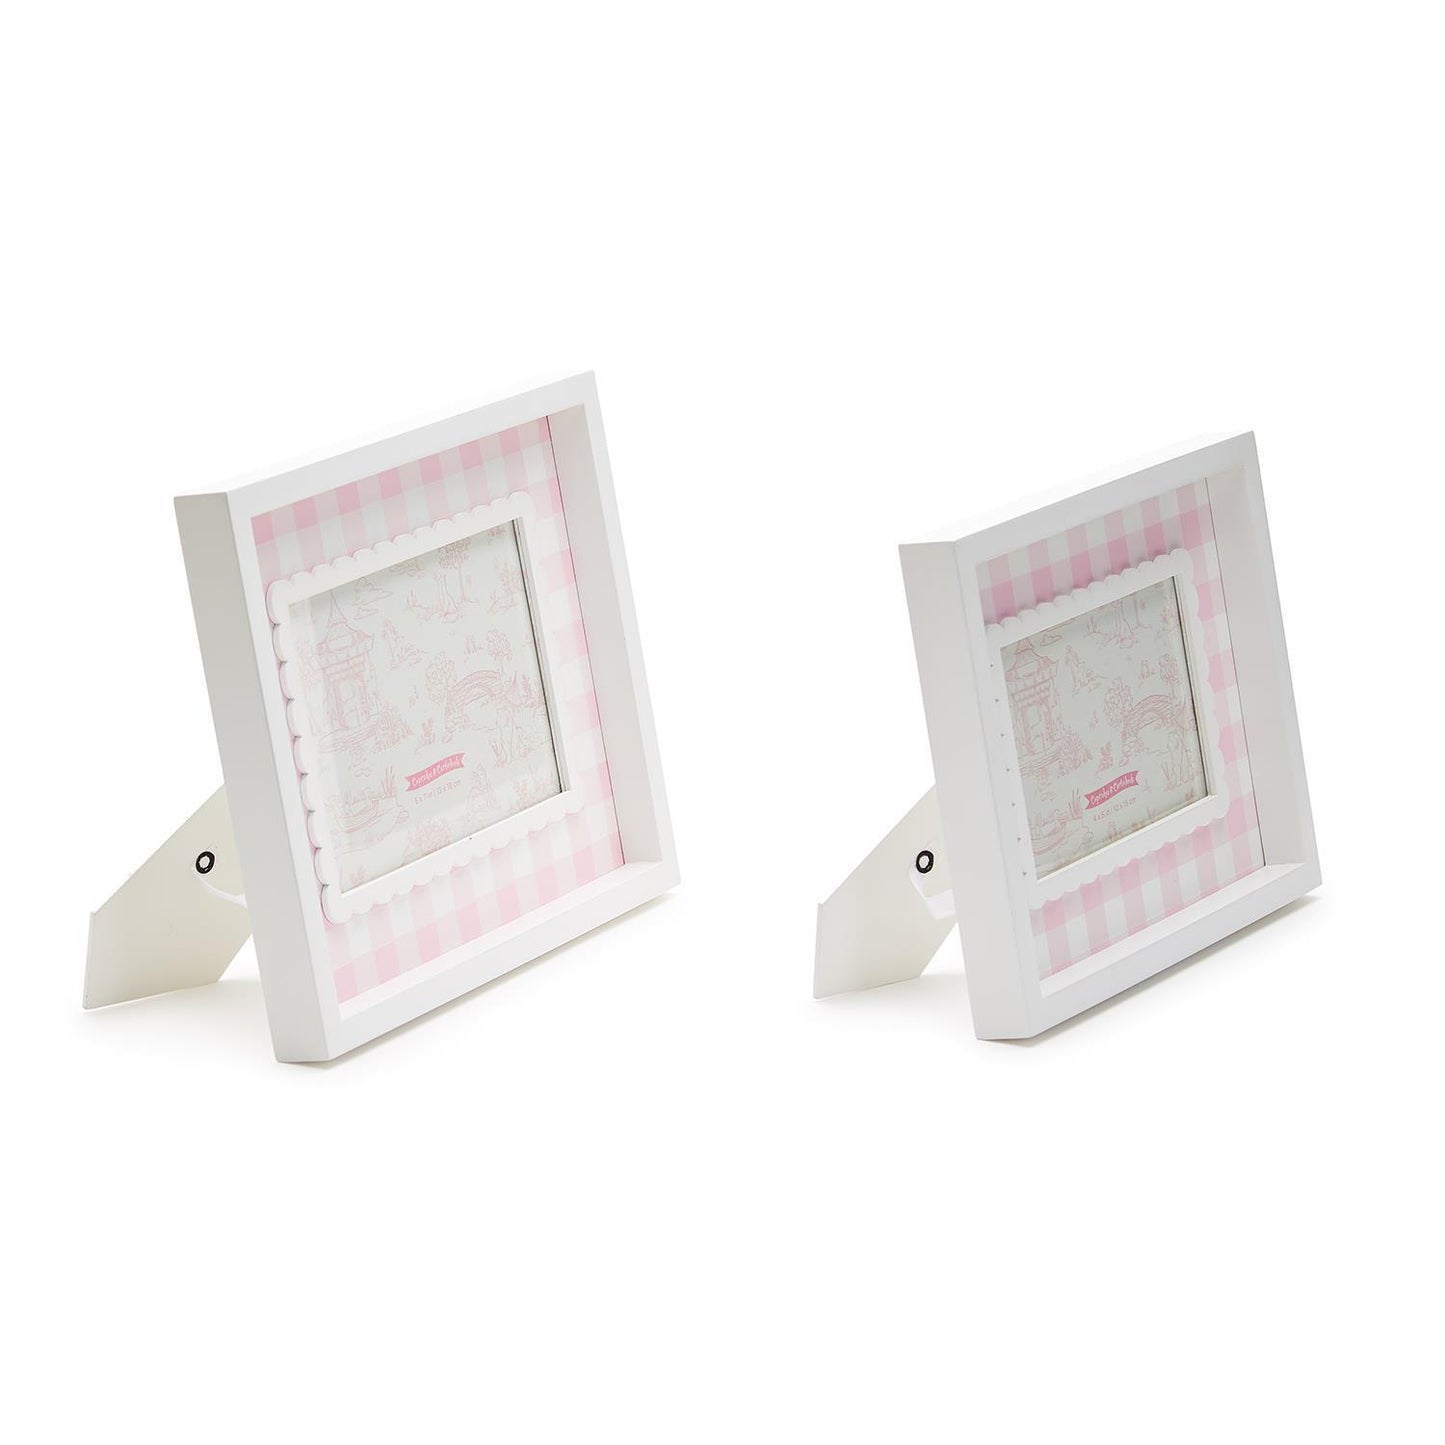 Pink Gingham Photo Frames In sizes 4" x 6" and 5" x 7"